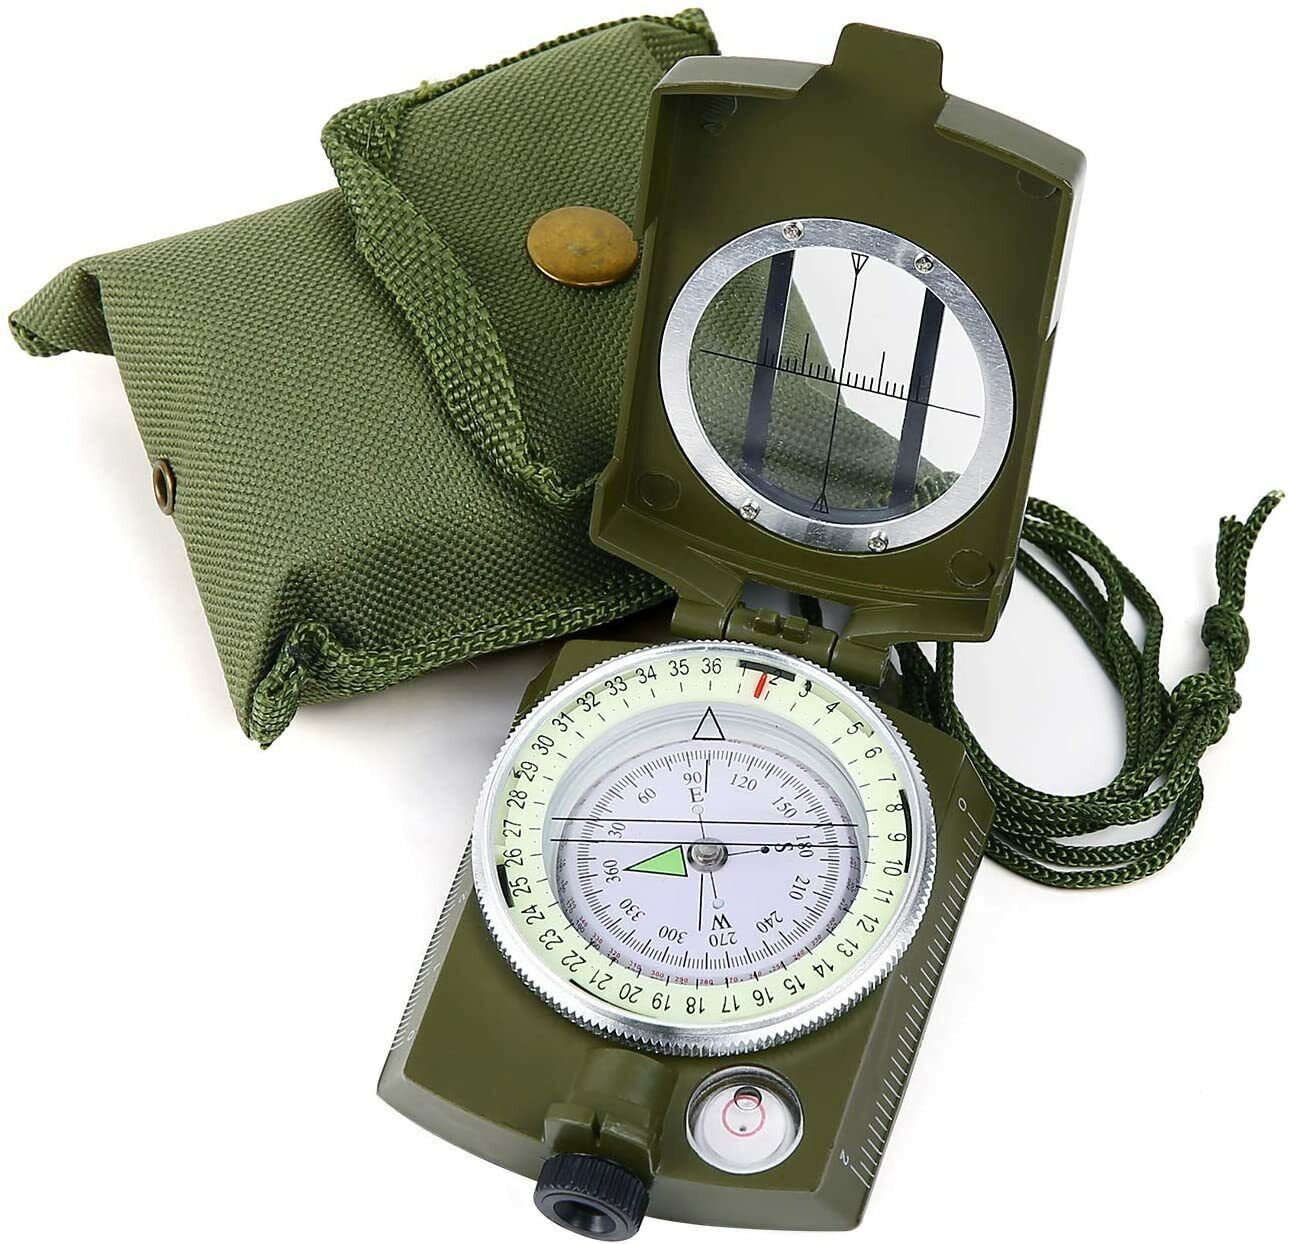 Military Lensatic Sighting Camping Compass w/ Carrying Bag Waterproof Camping